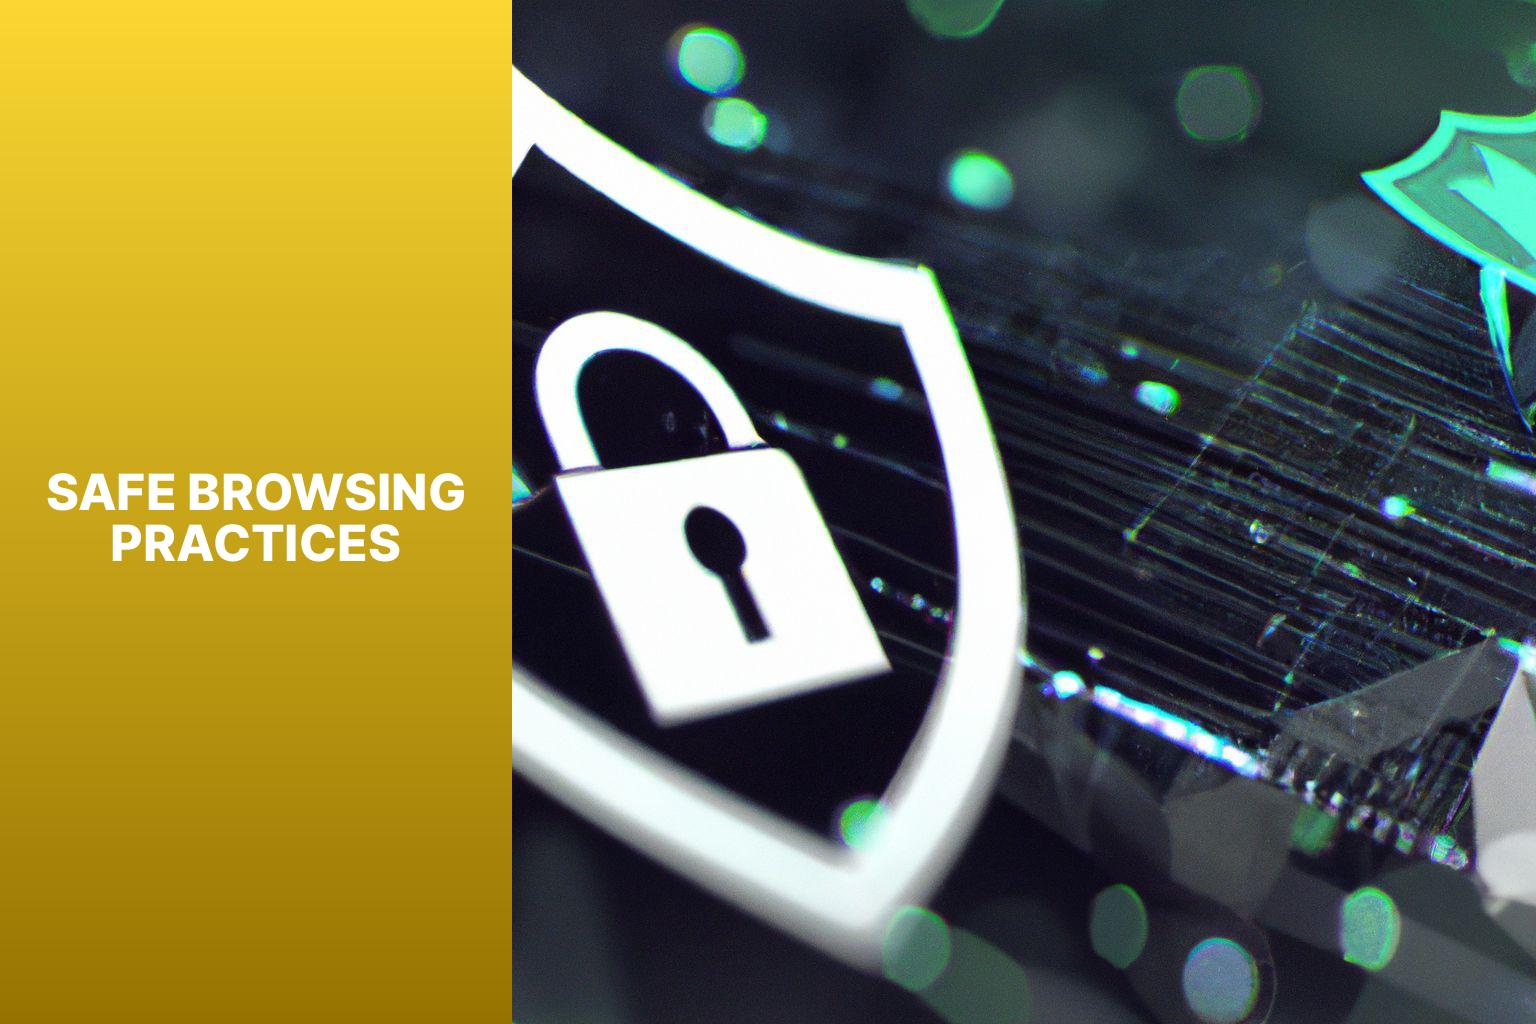 Safe Browsing Practices - Best Practices for Keeping Your Devices Secure 